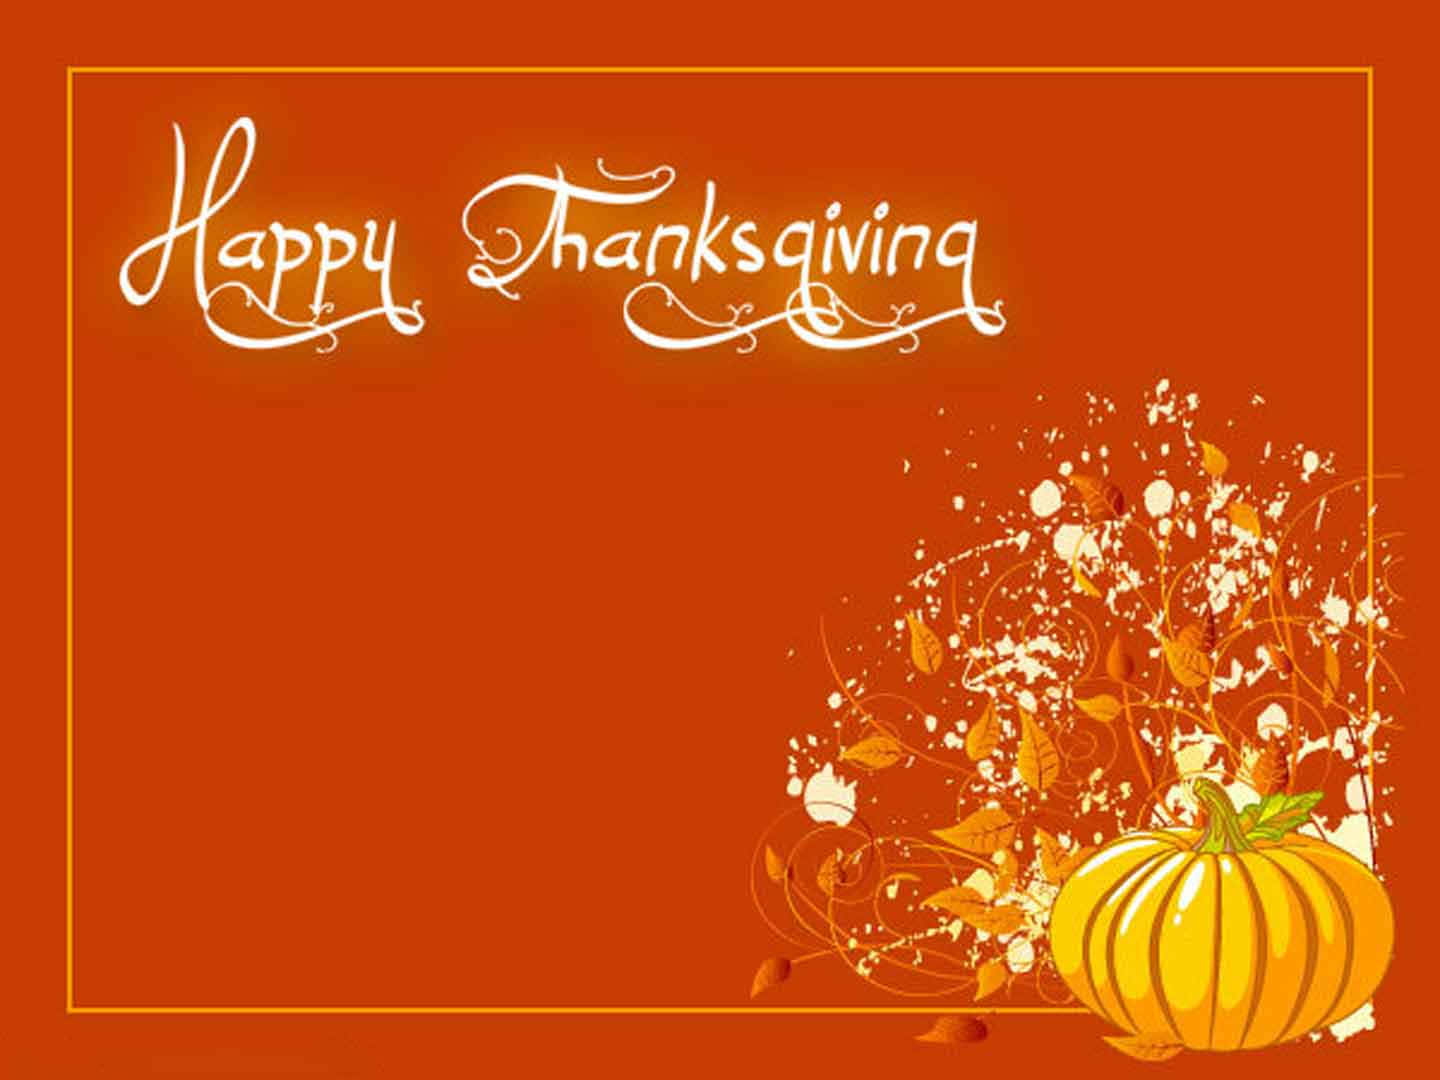 Magical Happy Thanksgiving Greeting Card With Pumpkin